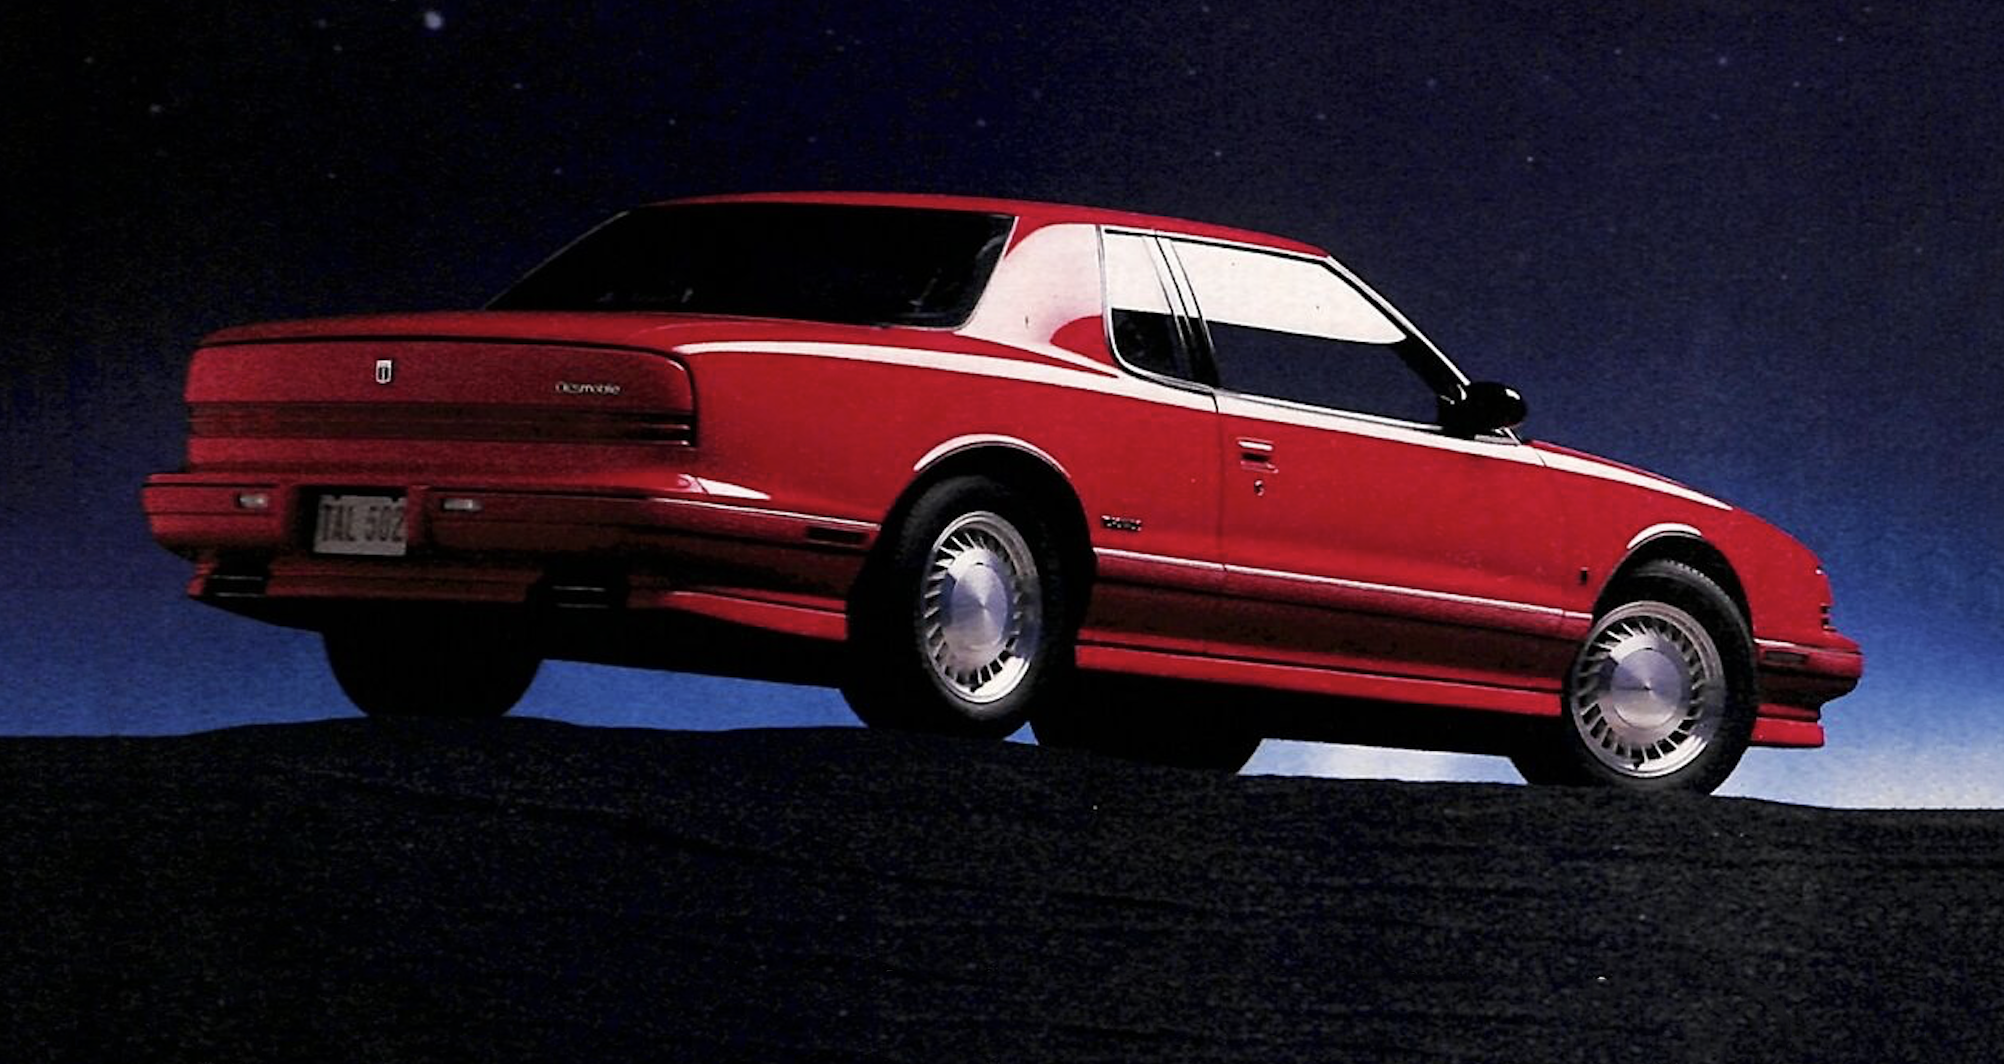 Classic Ads Featuring the Backs of Cars